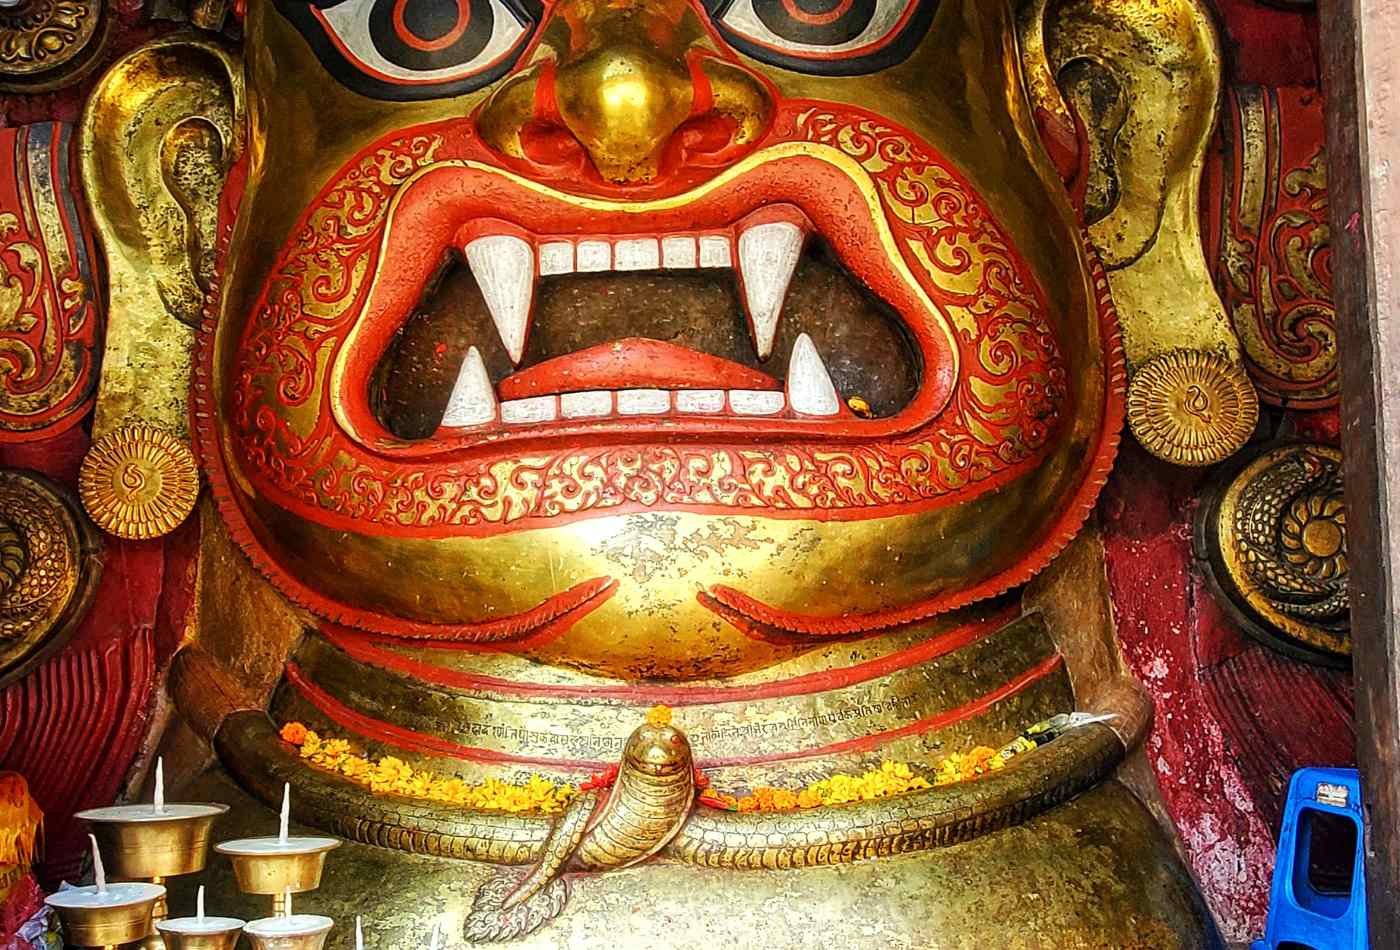 An image of the Swet Bhairab, with an opening mouth where two lower and two upper white teeth are visible, gives appearance of a fierce expression.